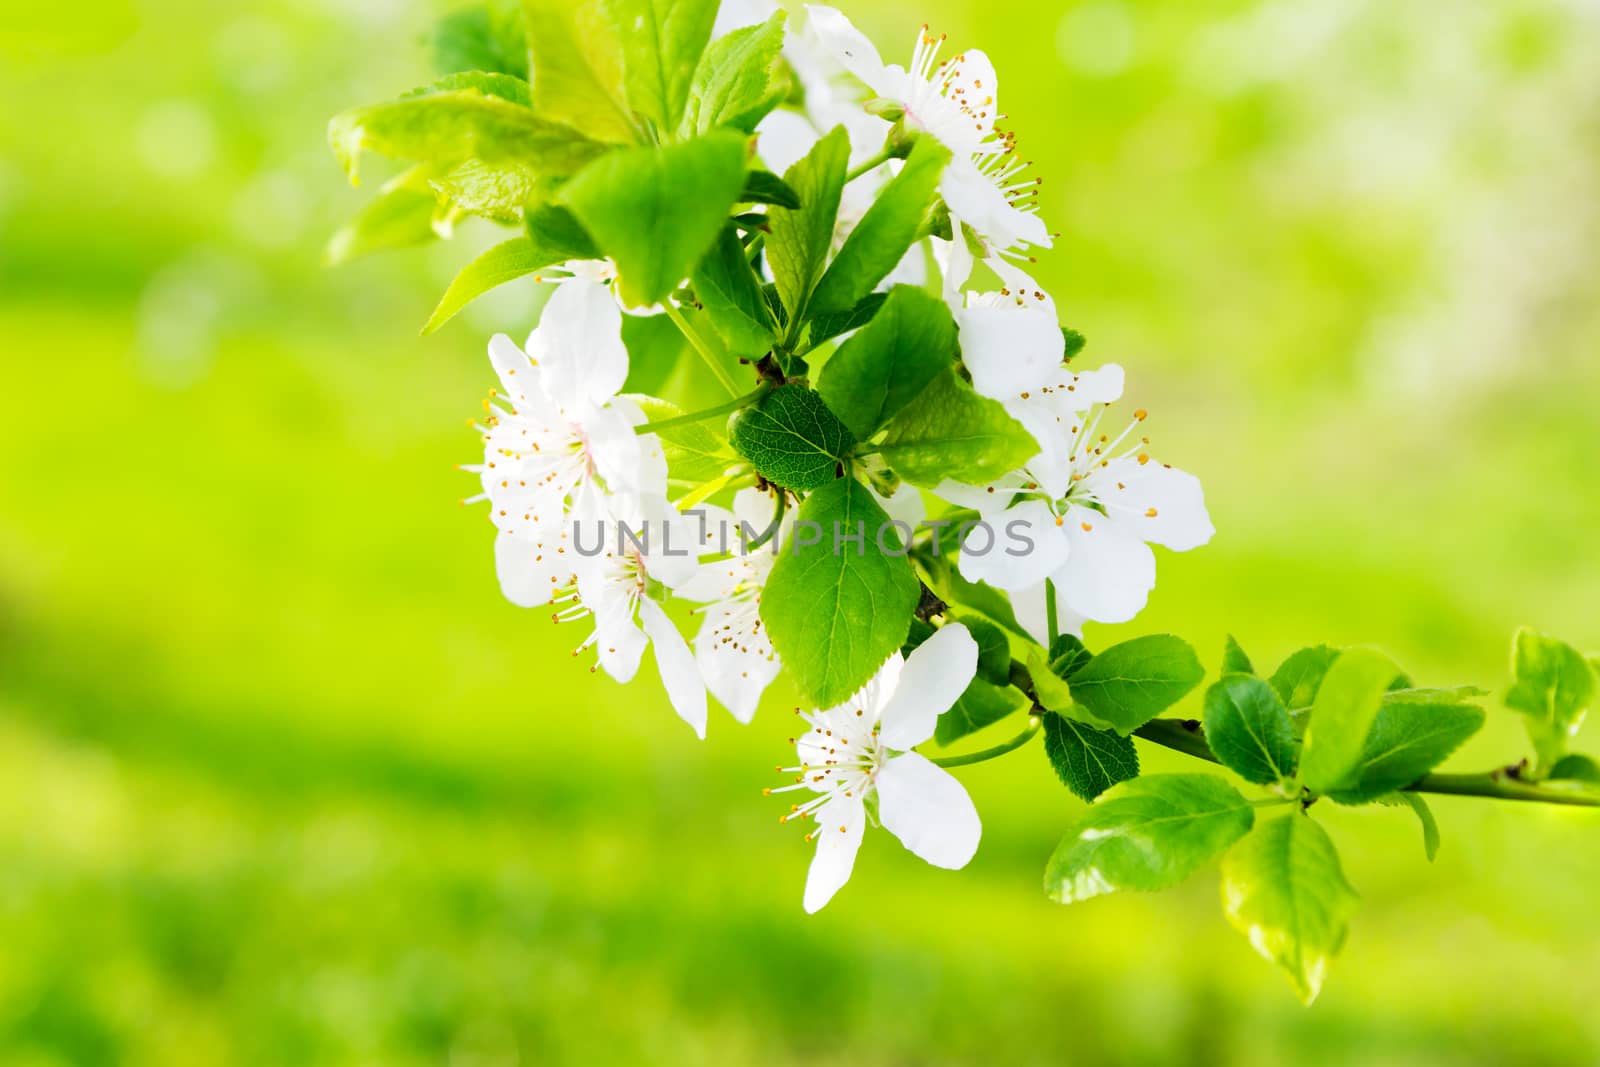 flowers of apple tree on a grass by Pellinni